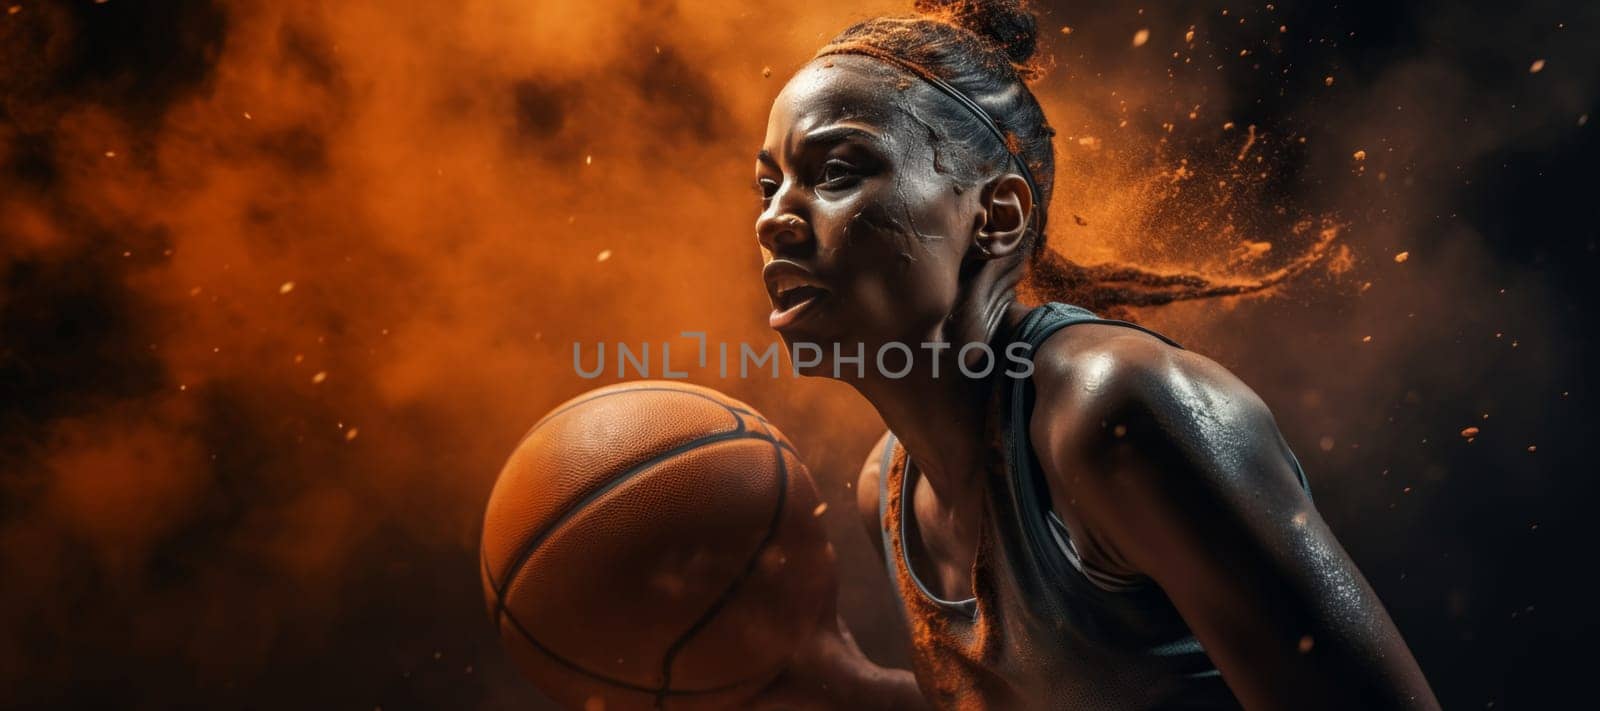 Dynamic Basketball Player in Action Shot by andreyz